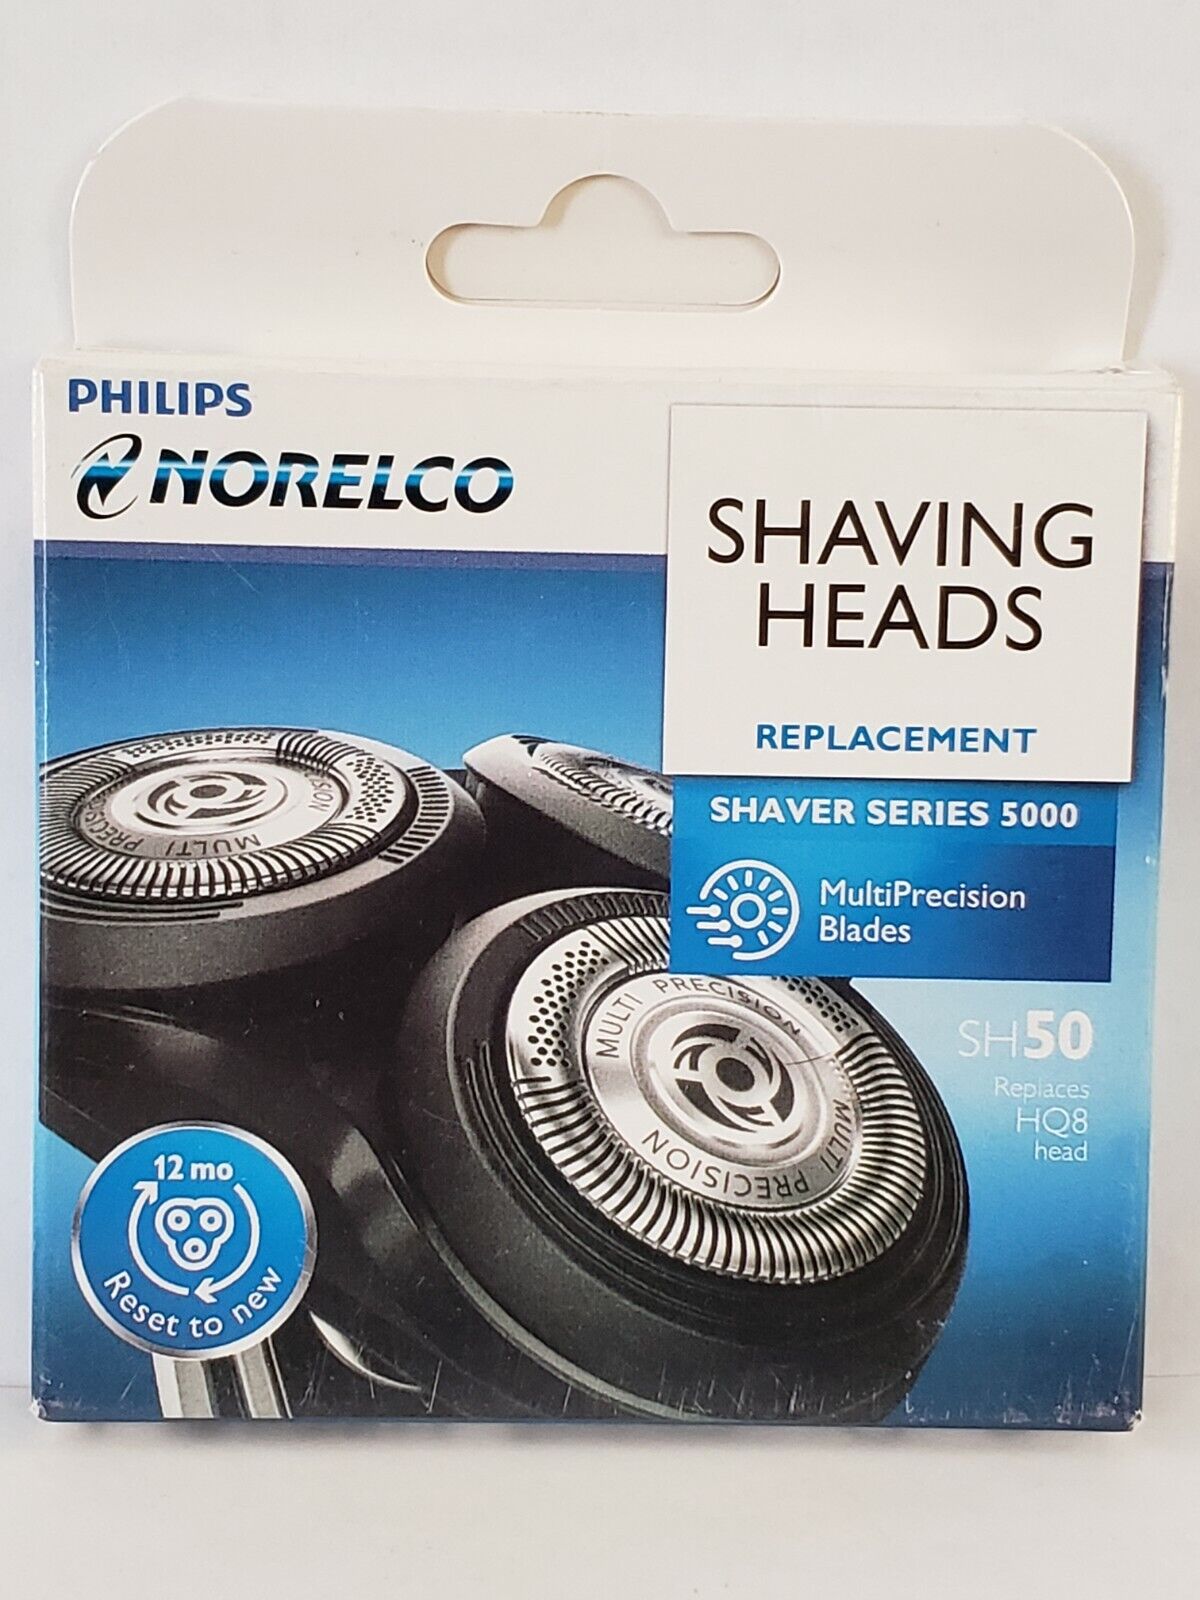 Philips Norelco Shaving Heads Replacement For Series 5000, SH50/52, HQ8 GENUINE